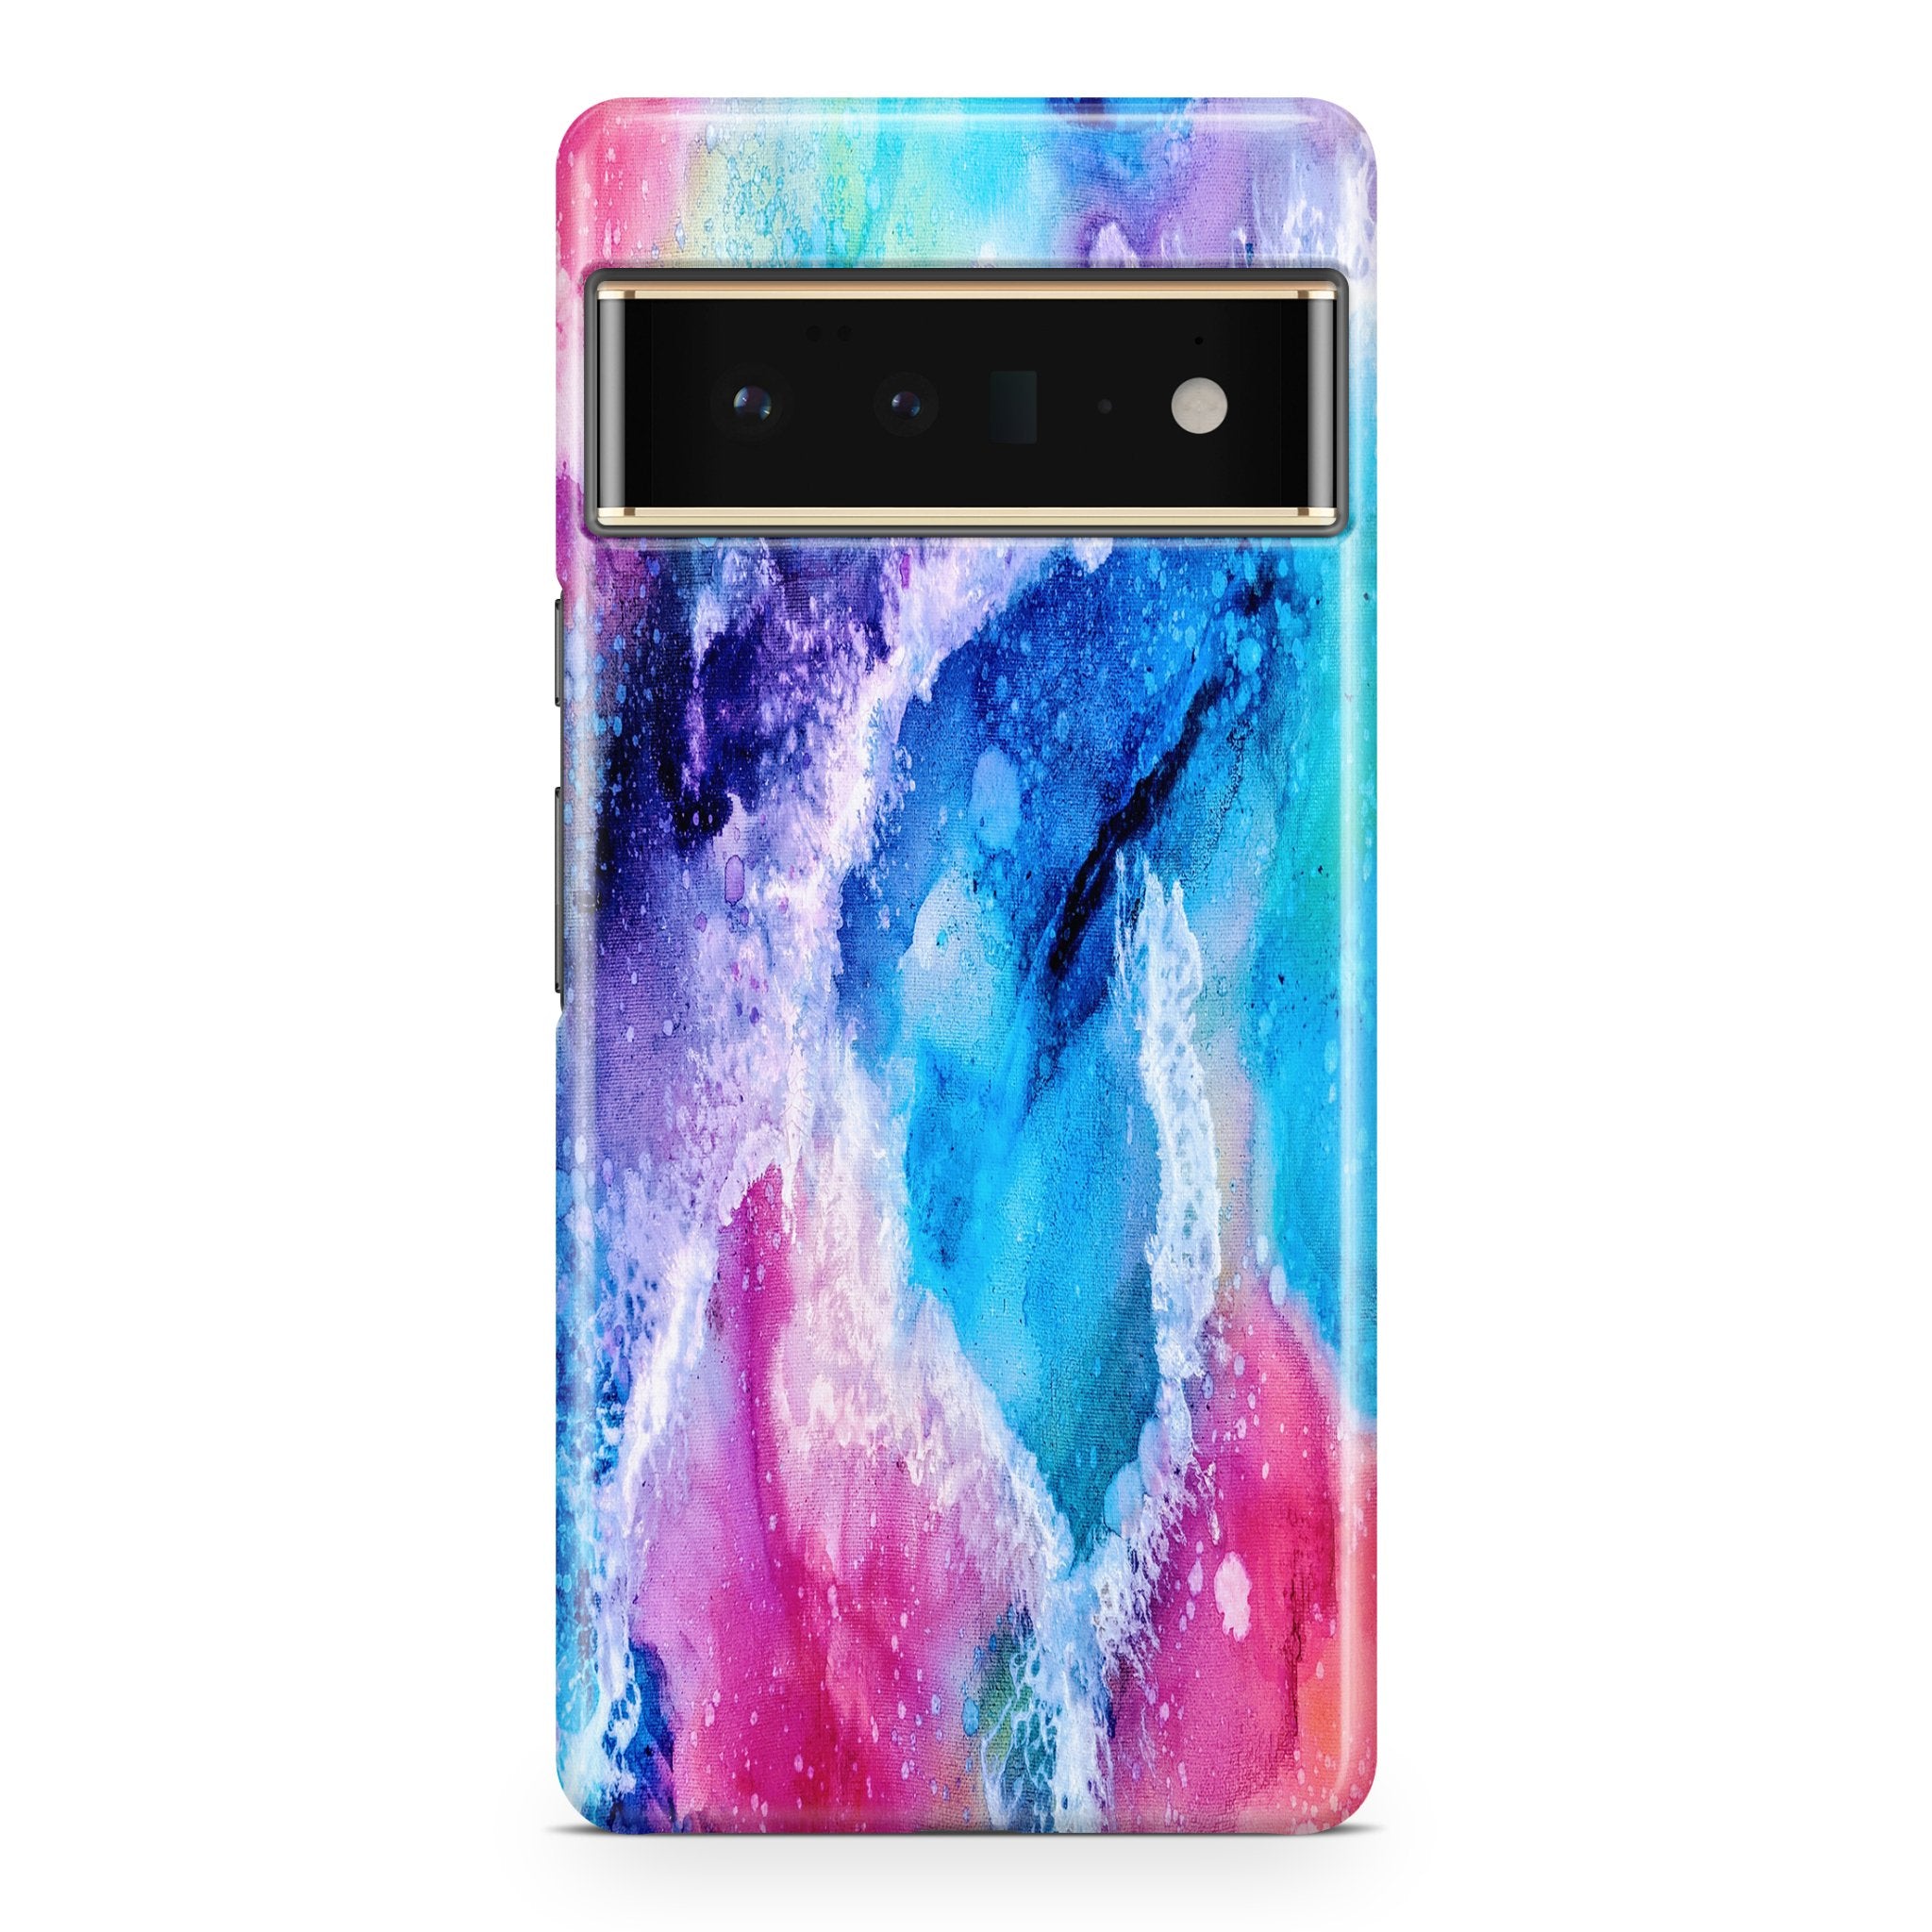 Crashing Waves - Google phone case designs by CaseSwagger